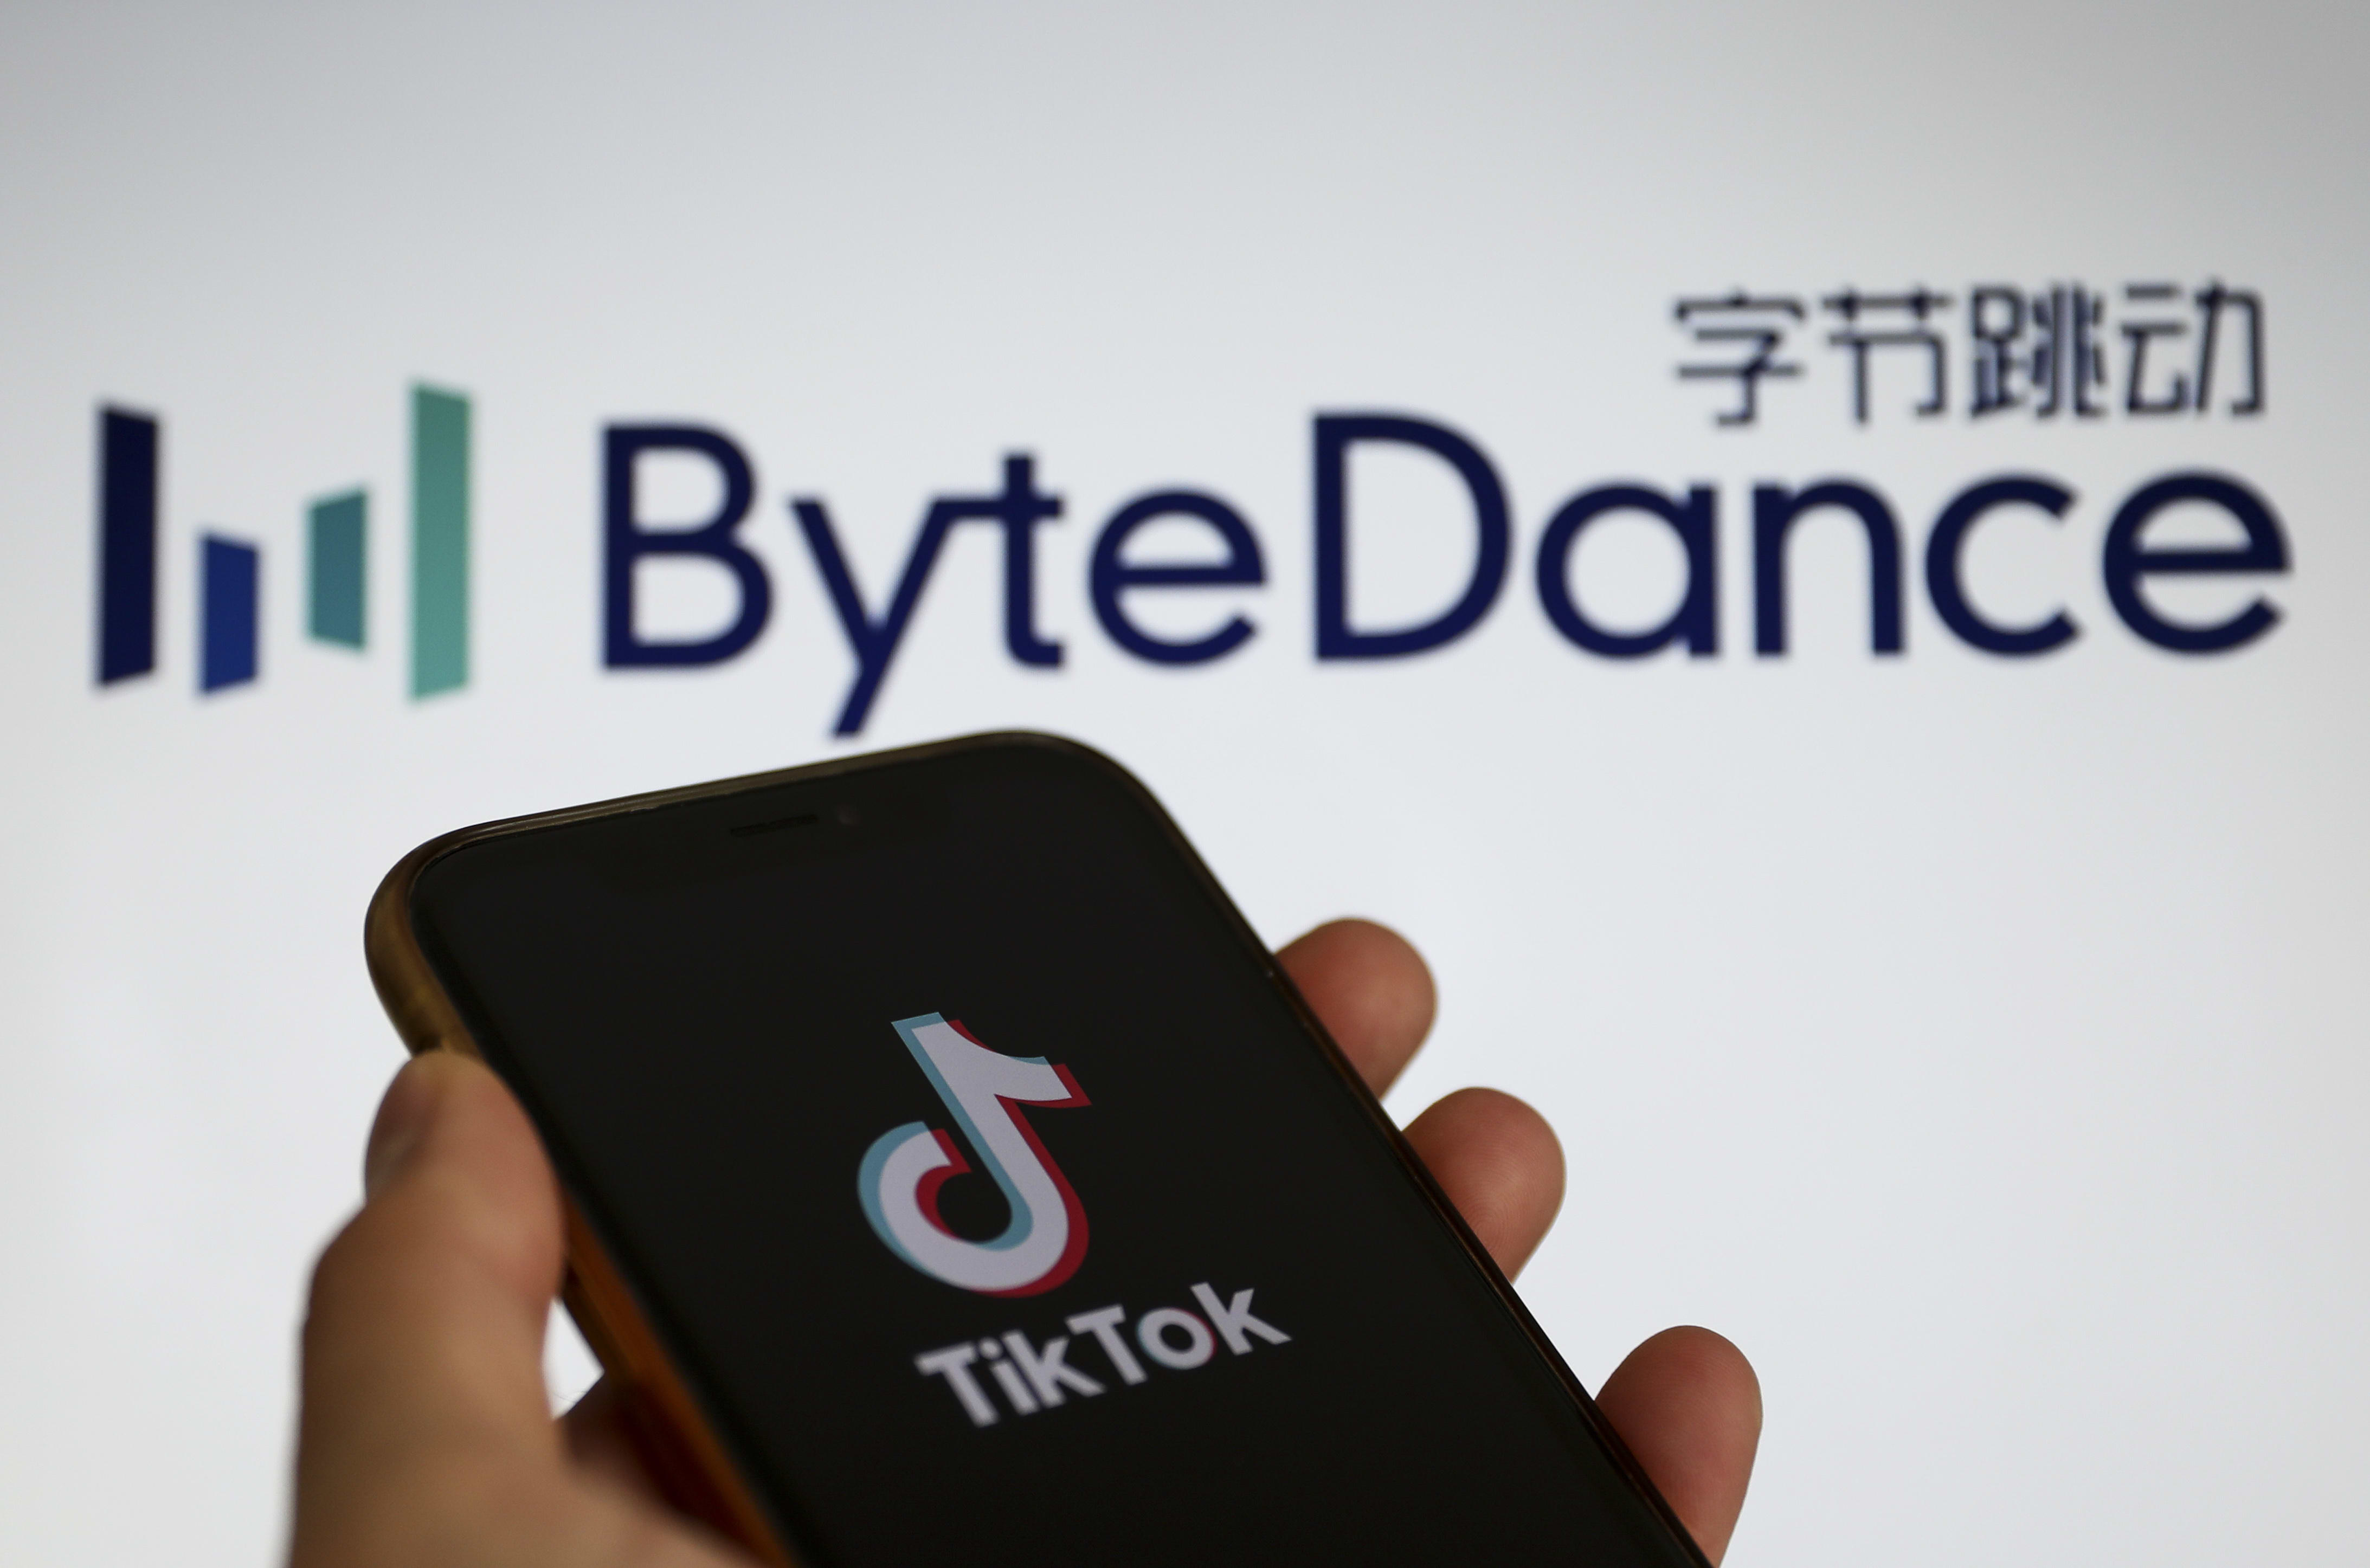 ByteDance takes over Tencent with the major acquisition of game studios